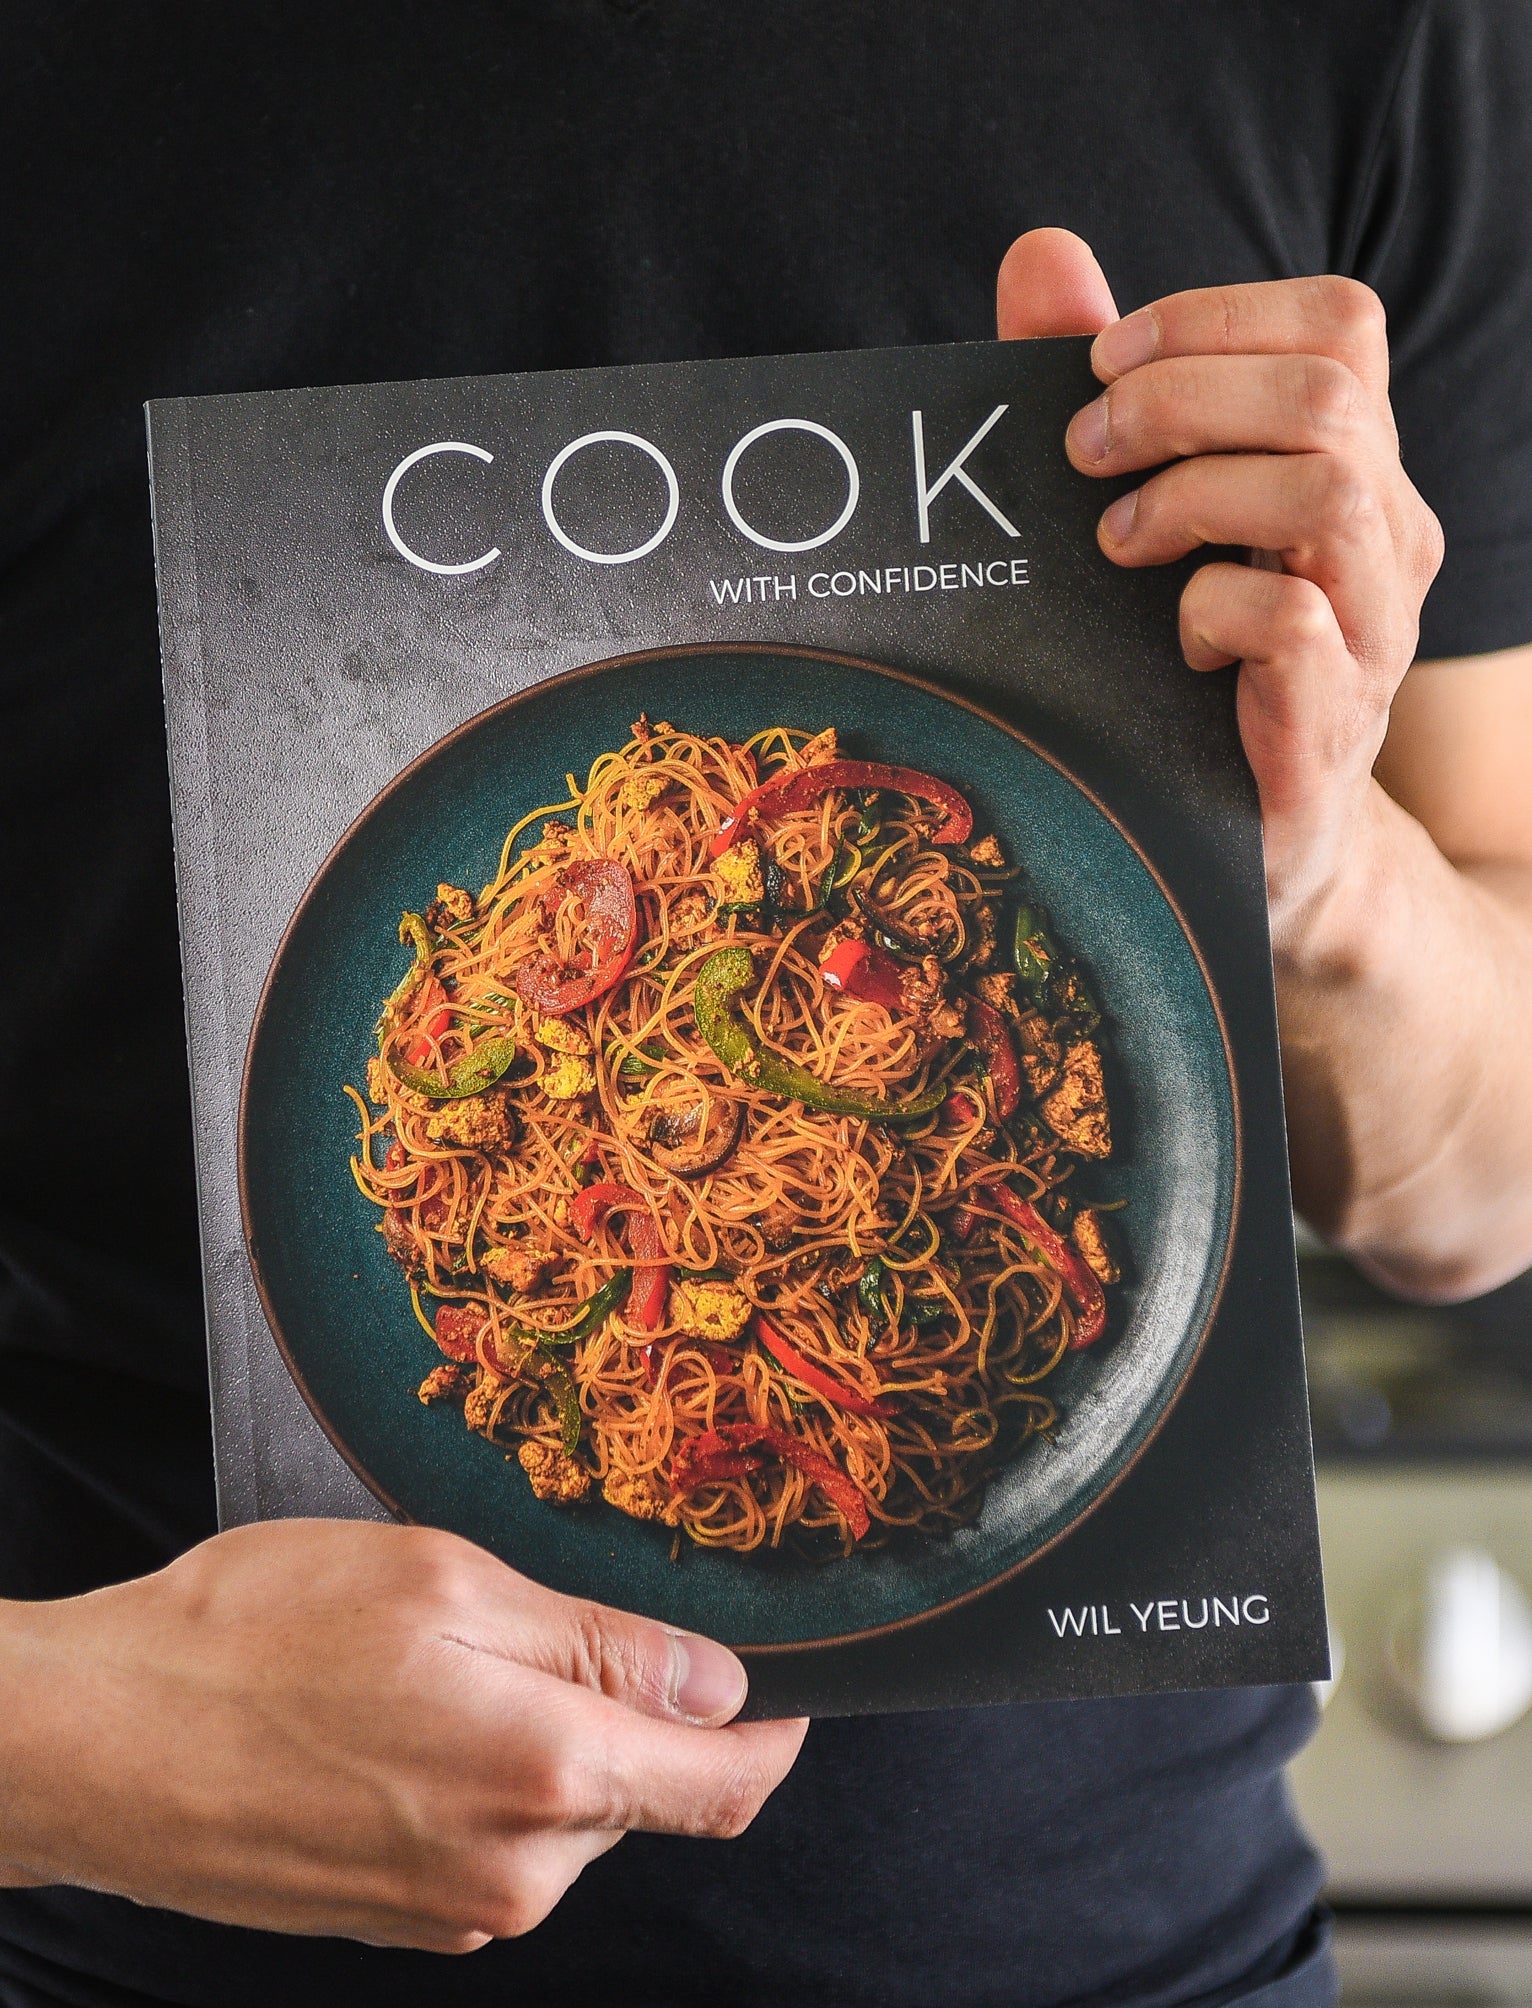 SIGNED PRINT BOOK - COOK WITH CONFIDENCE